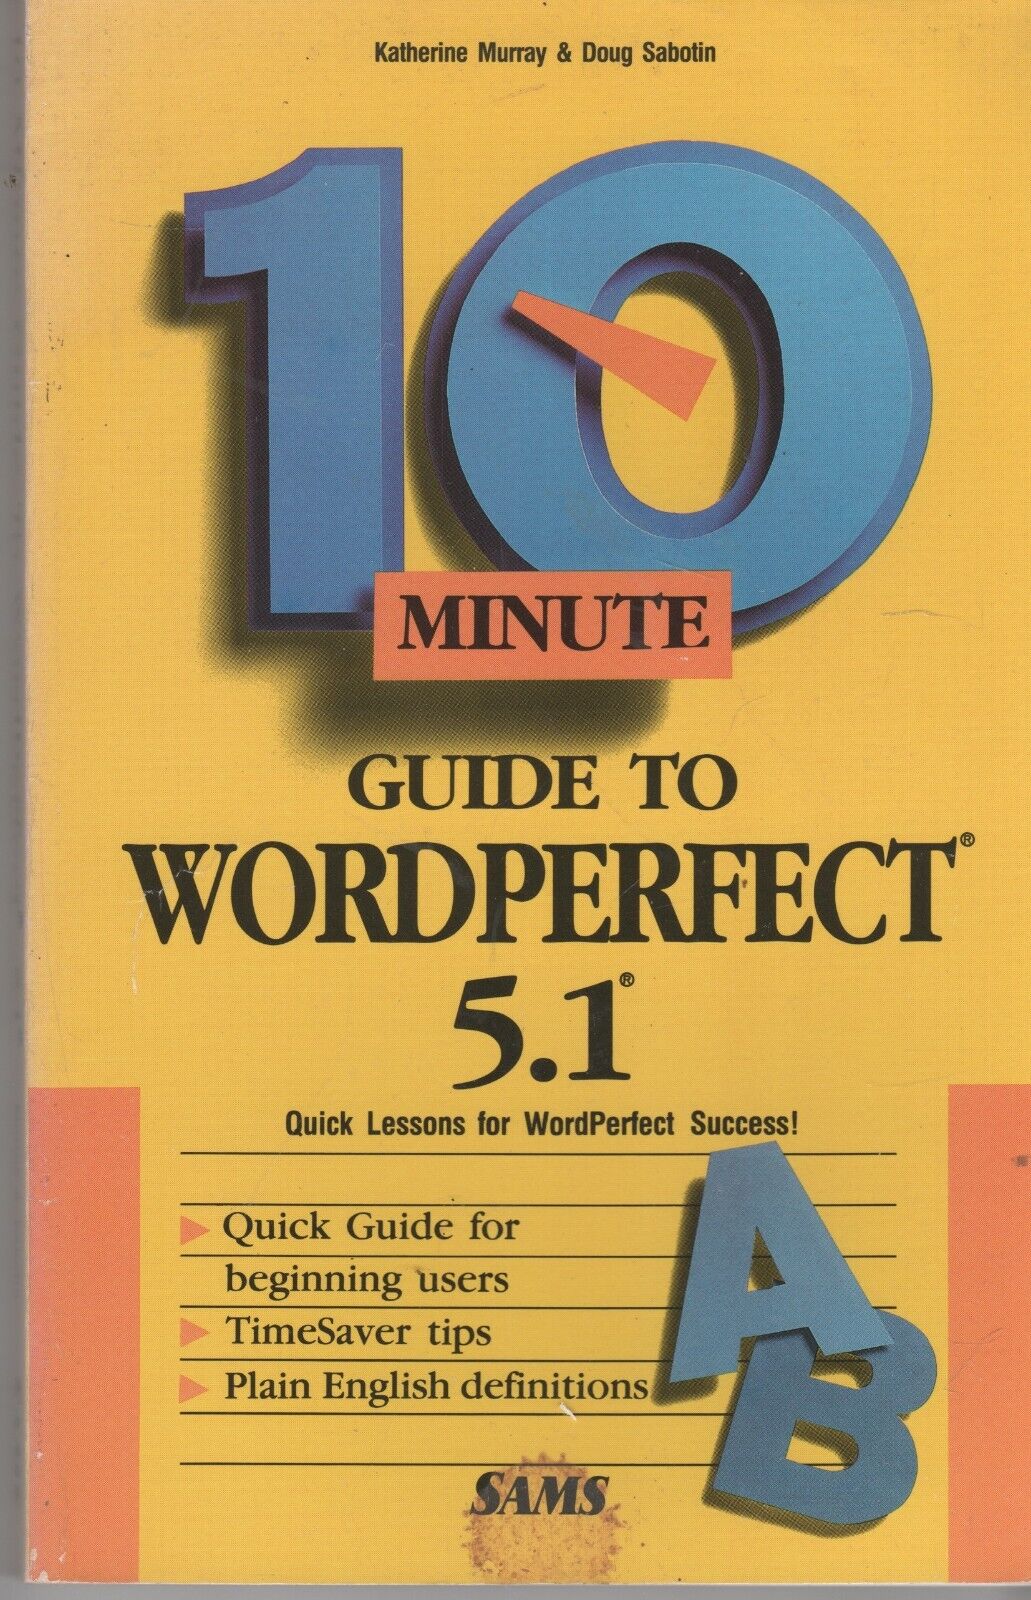 ITHistory Book (1992) 10 Minute Guide To Wordperfect 5.1 Murray Sabotin (Sams)